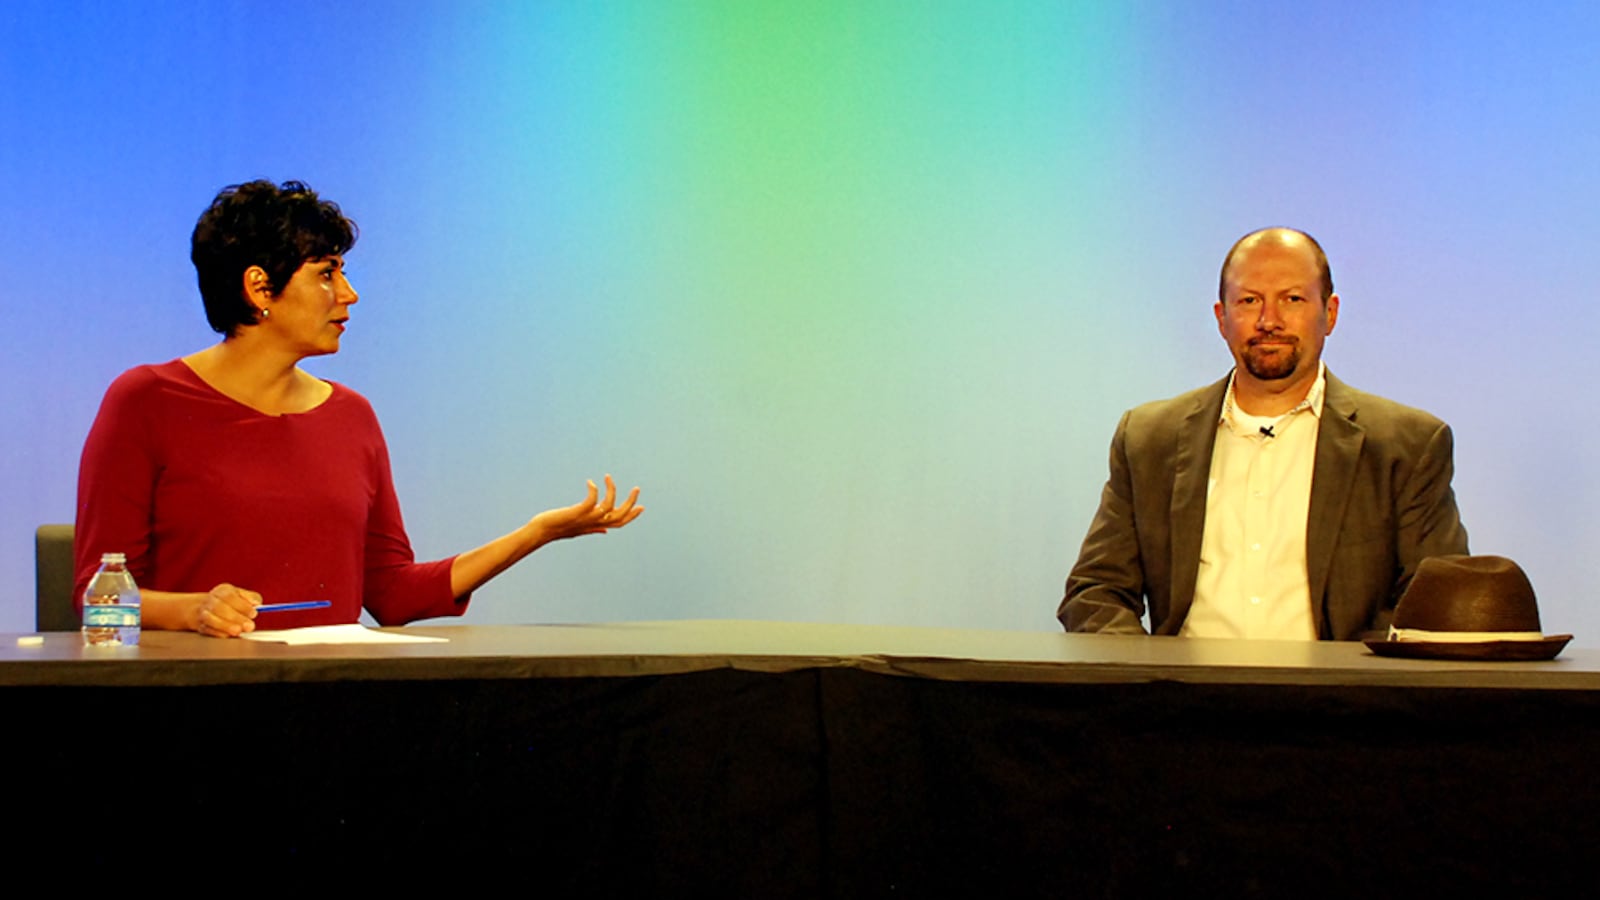 Denver school board candidates Lisa Flores and Michael Kiley debated Monday night.